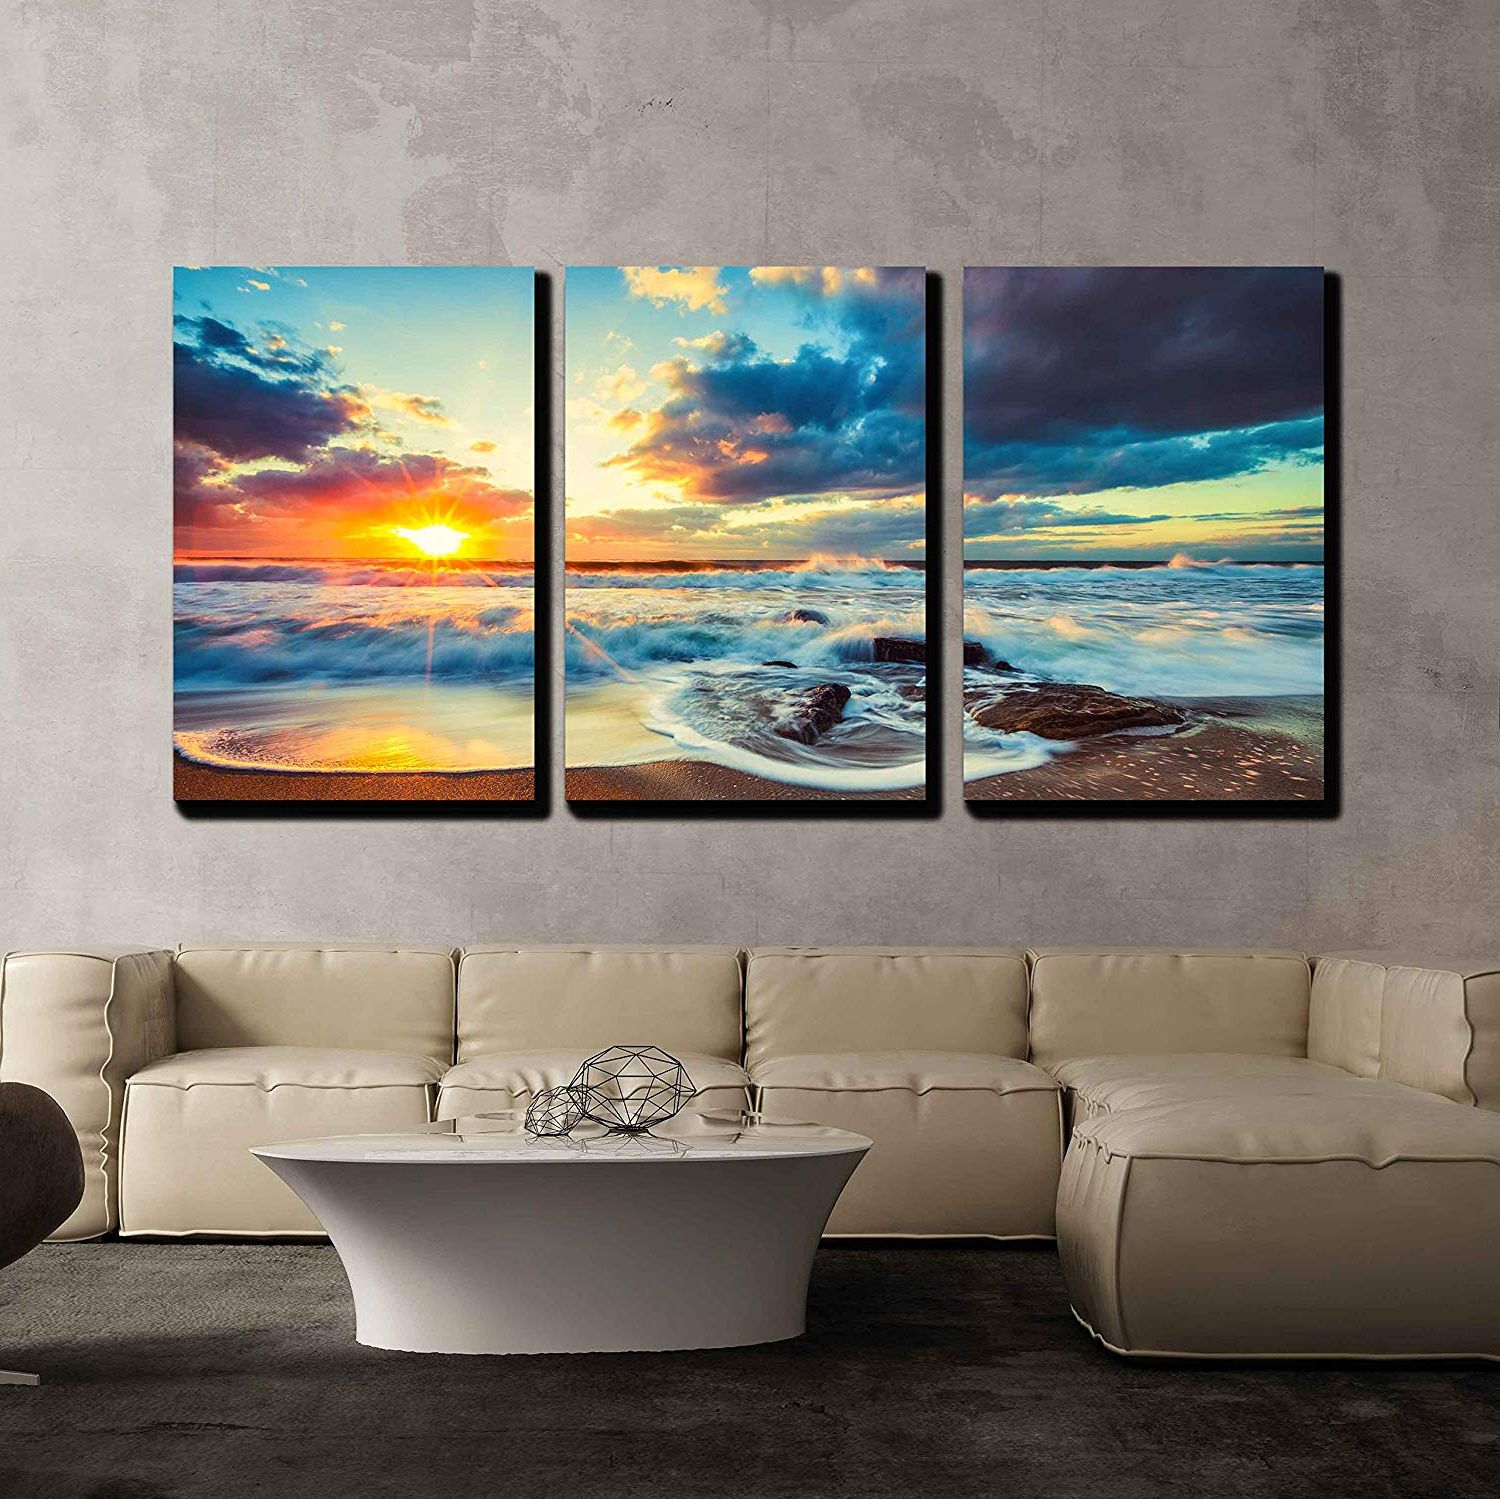 Large Wall Decor Ornaments Intended For Most Popular Wall26 3 Piece Canvas Wall Art – Beautiful Cloudscape Over The Sea (View 15 of 15)